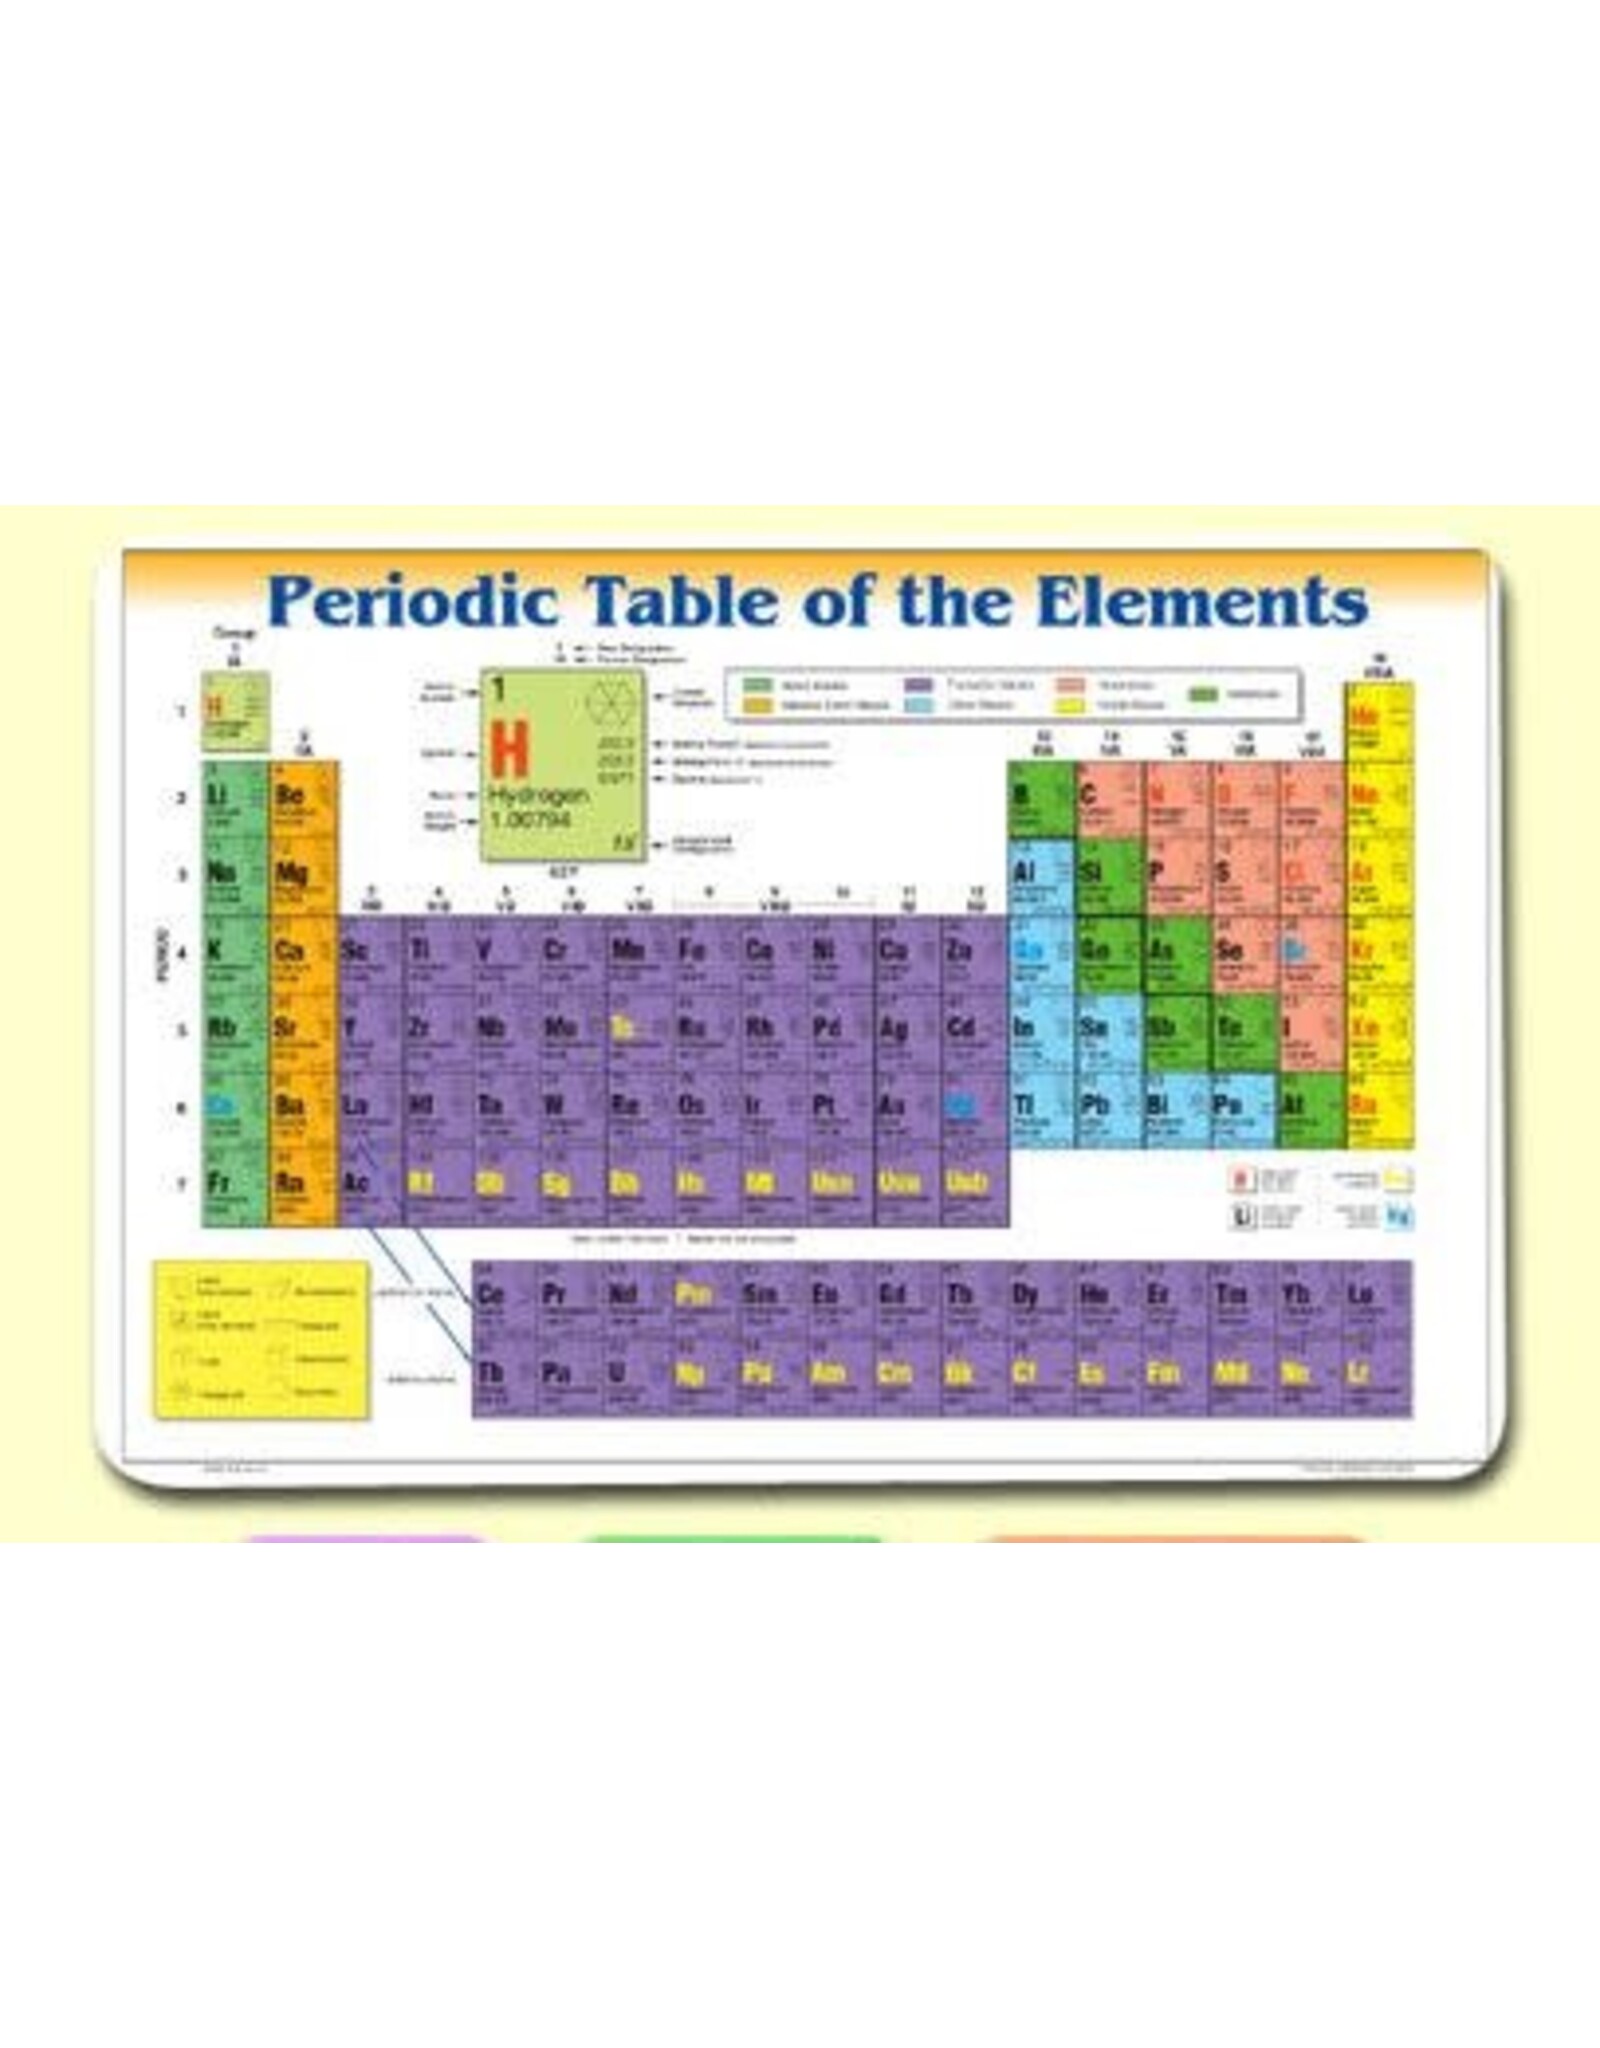 Painless Learning Products Periodic Table of Elements Learning Mat